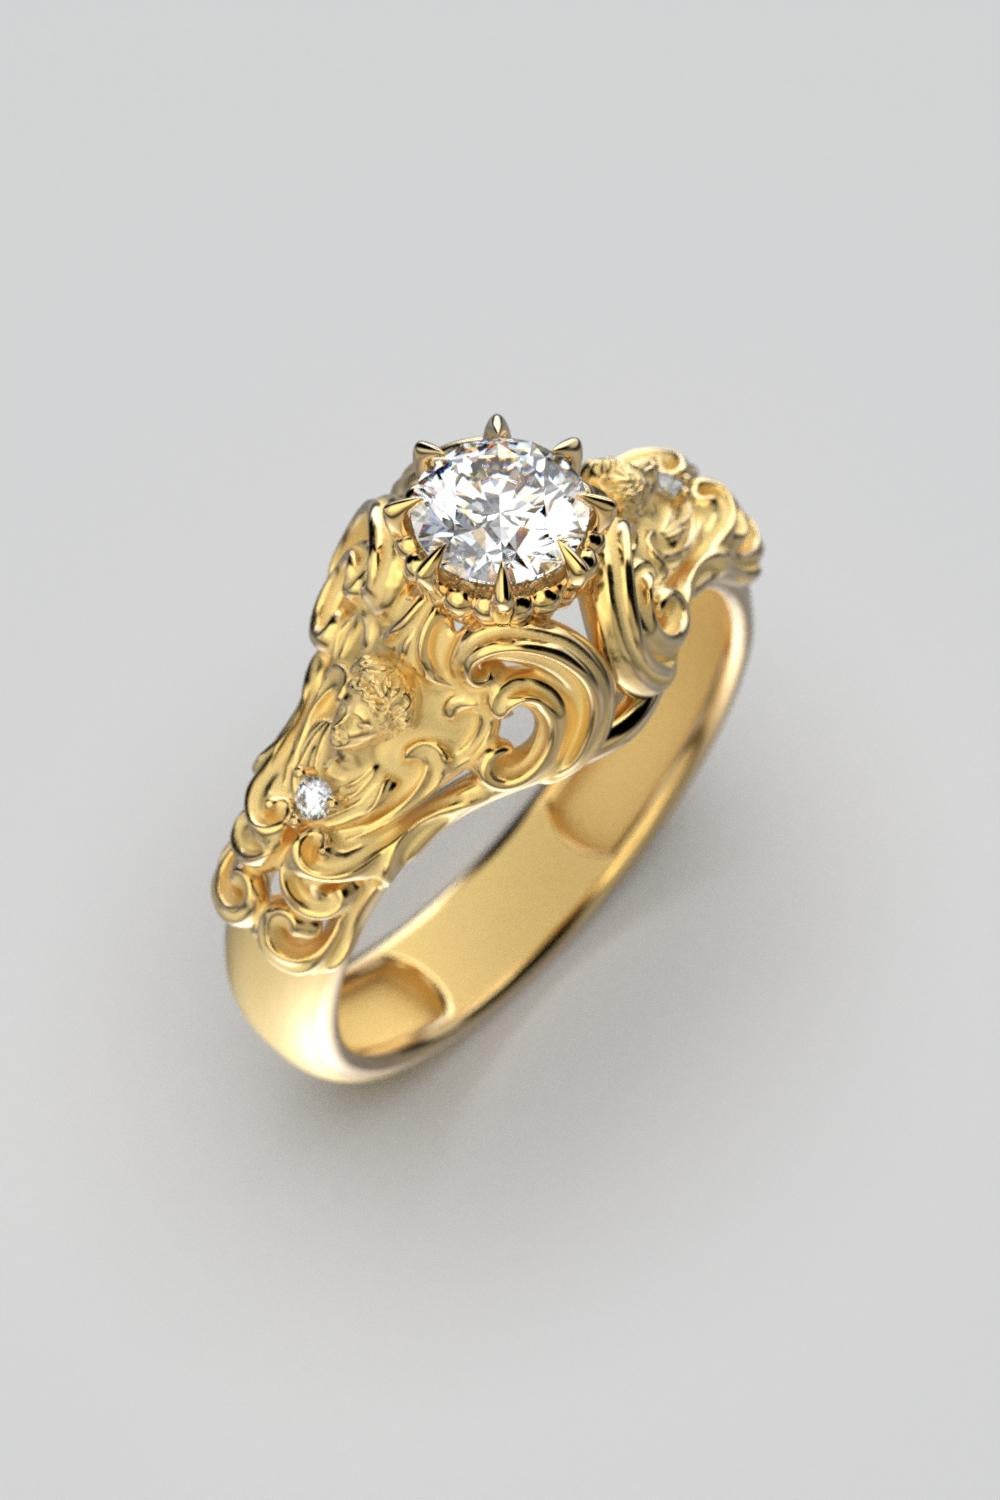 For Sale:  14k Gold Diamond Ring by Oltremare Gioielli in Italian Renaissance Style 3